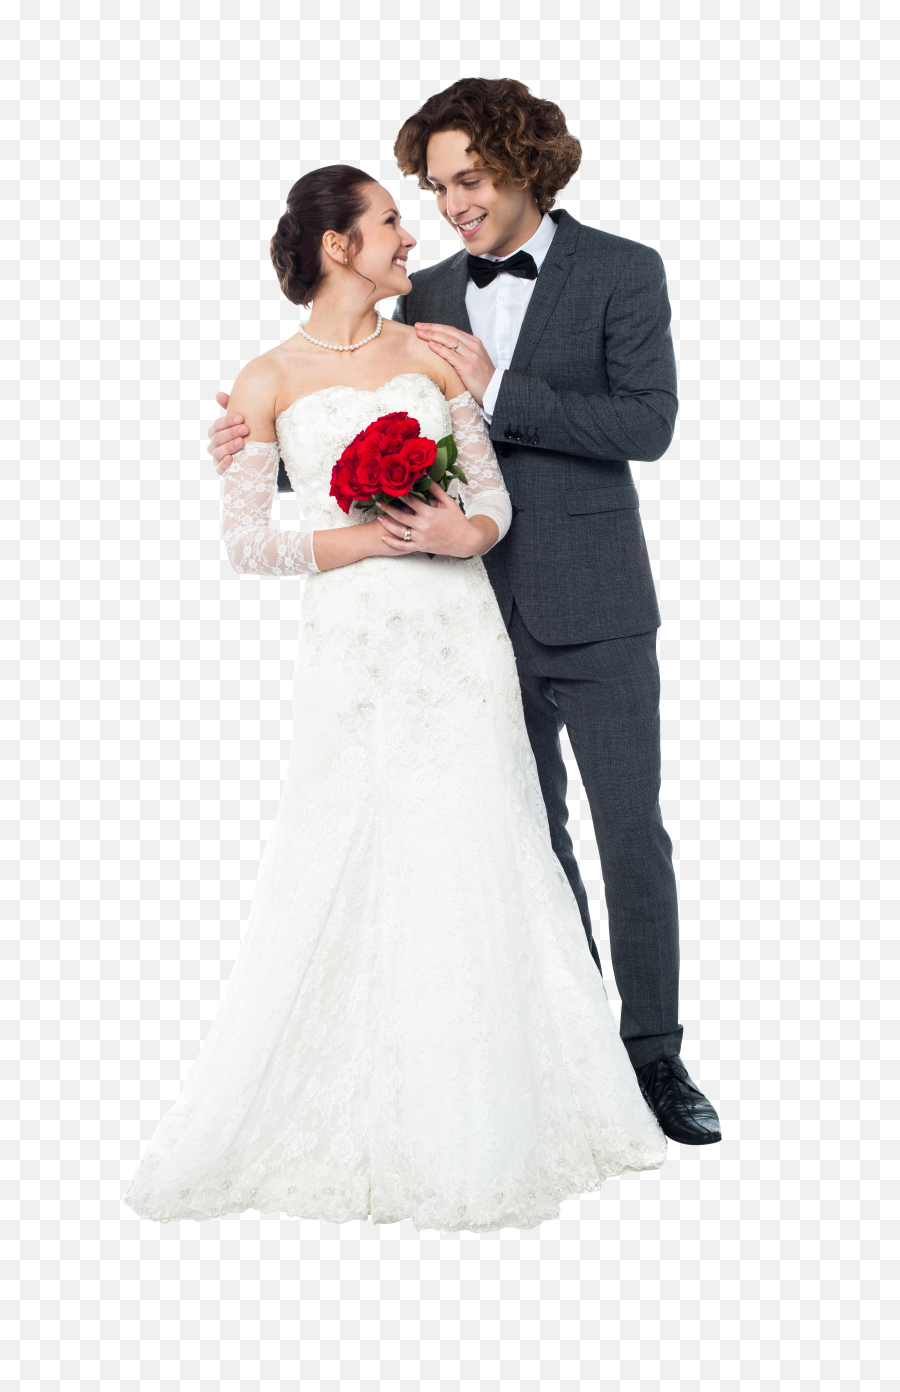 Download Free Png Wedding Couple - Wedding Dress For Couple,Married Couple Png